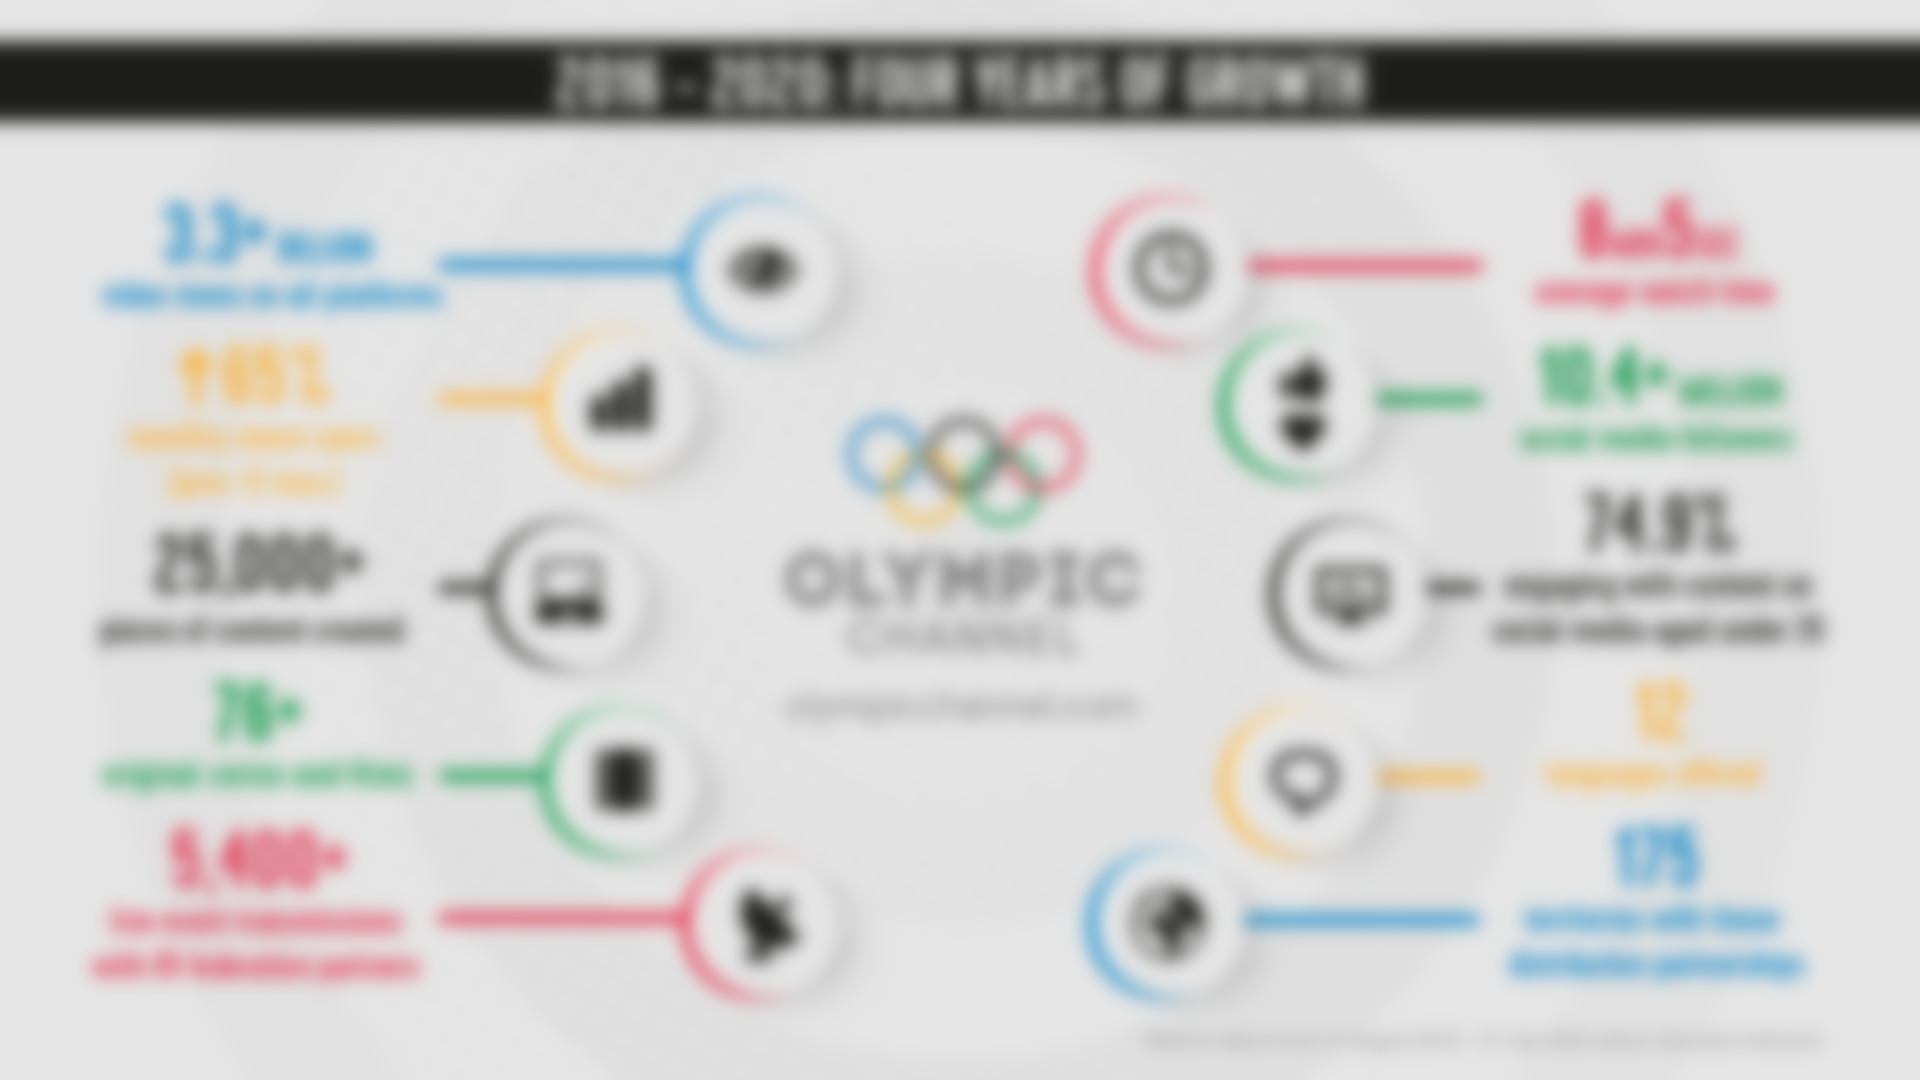 Four years of Olympic Channel growth